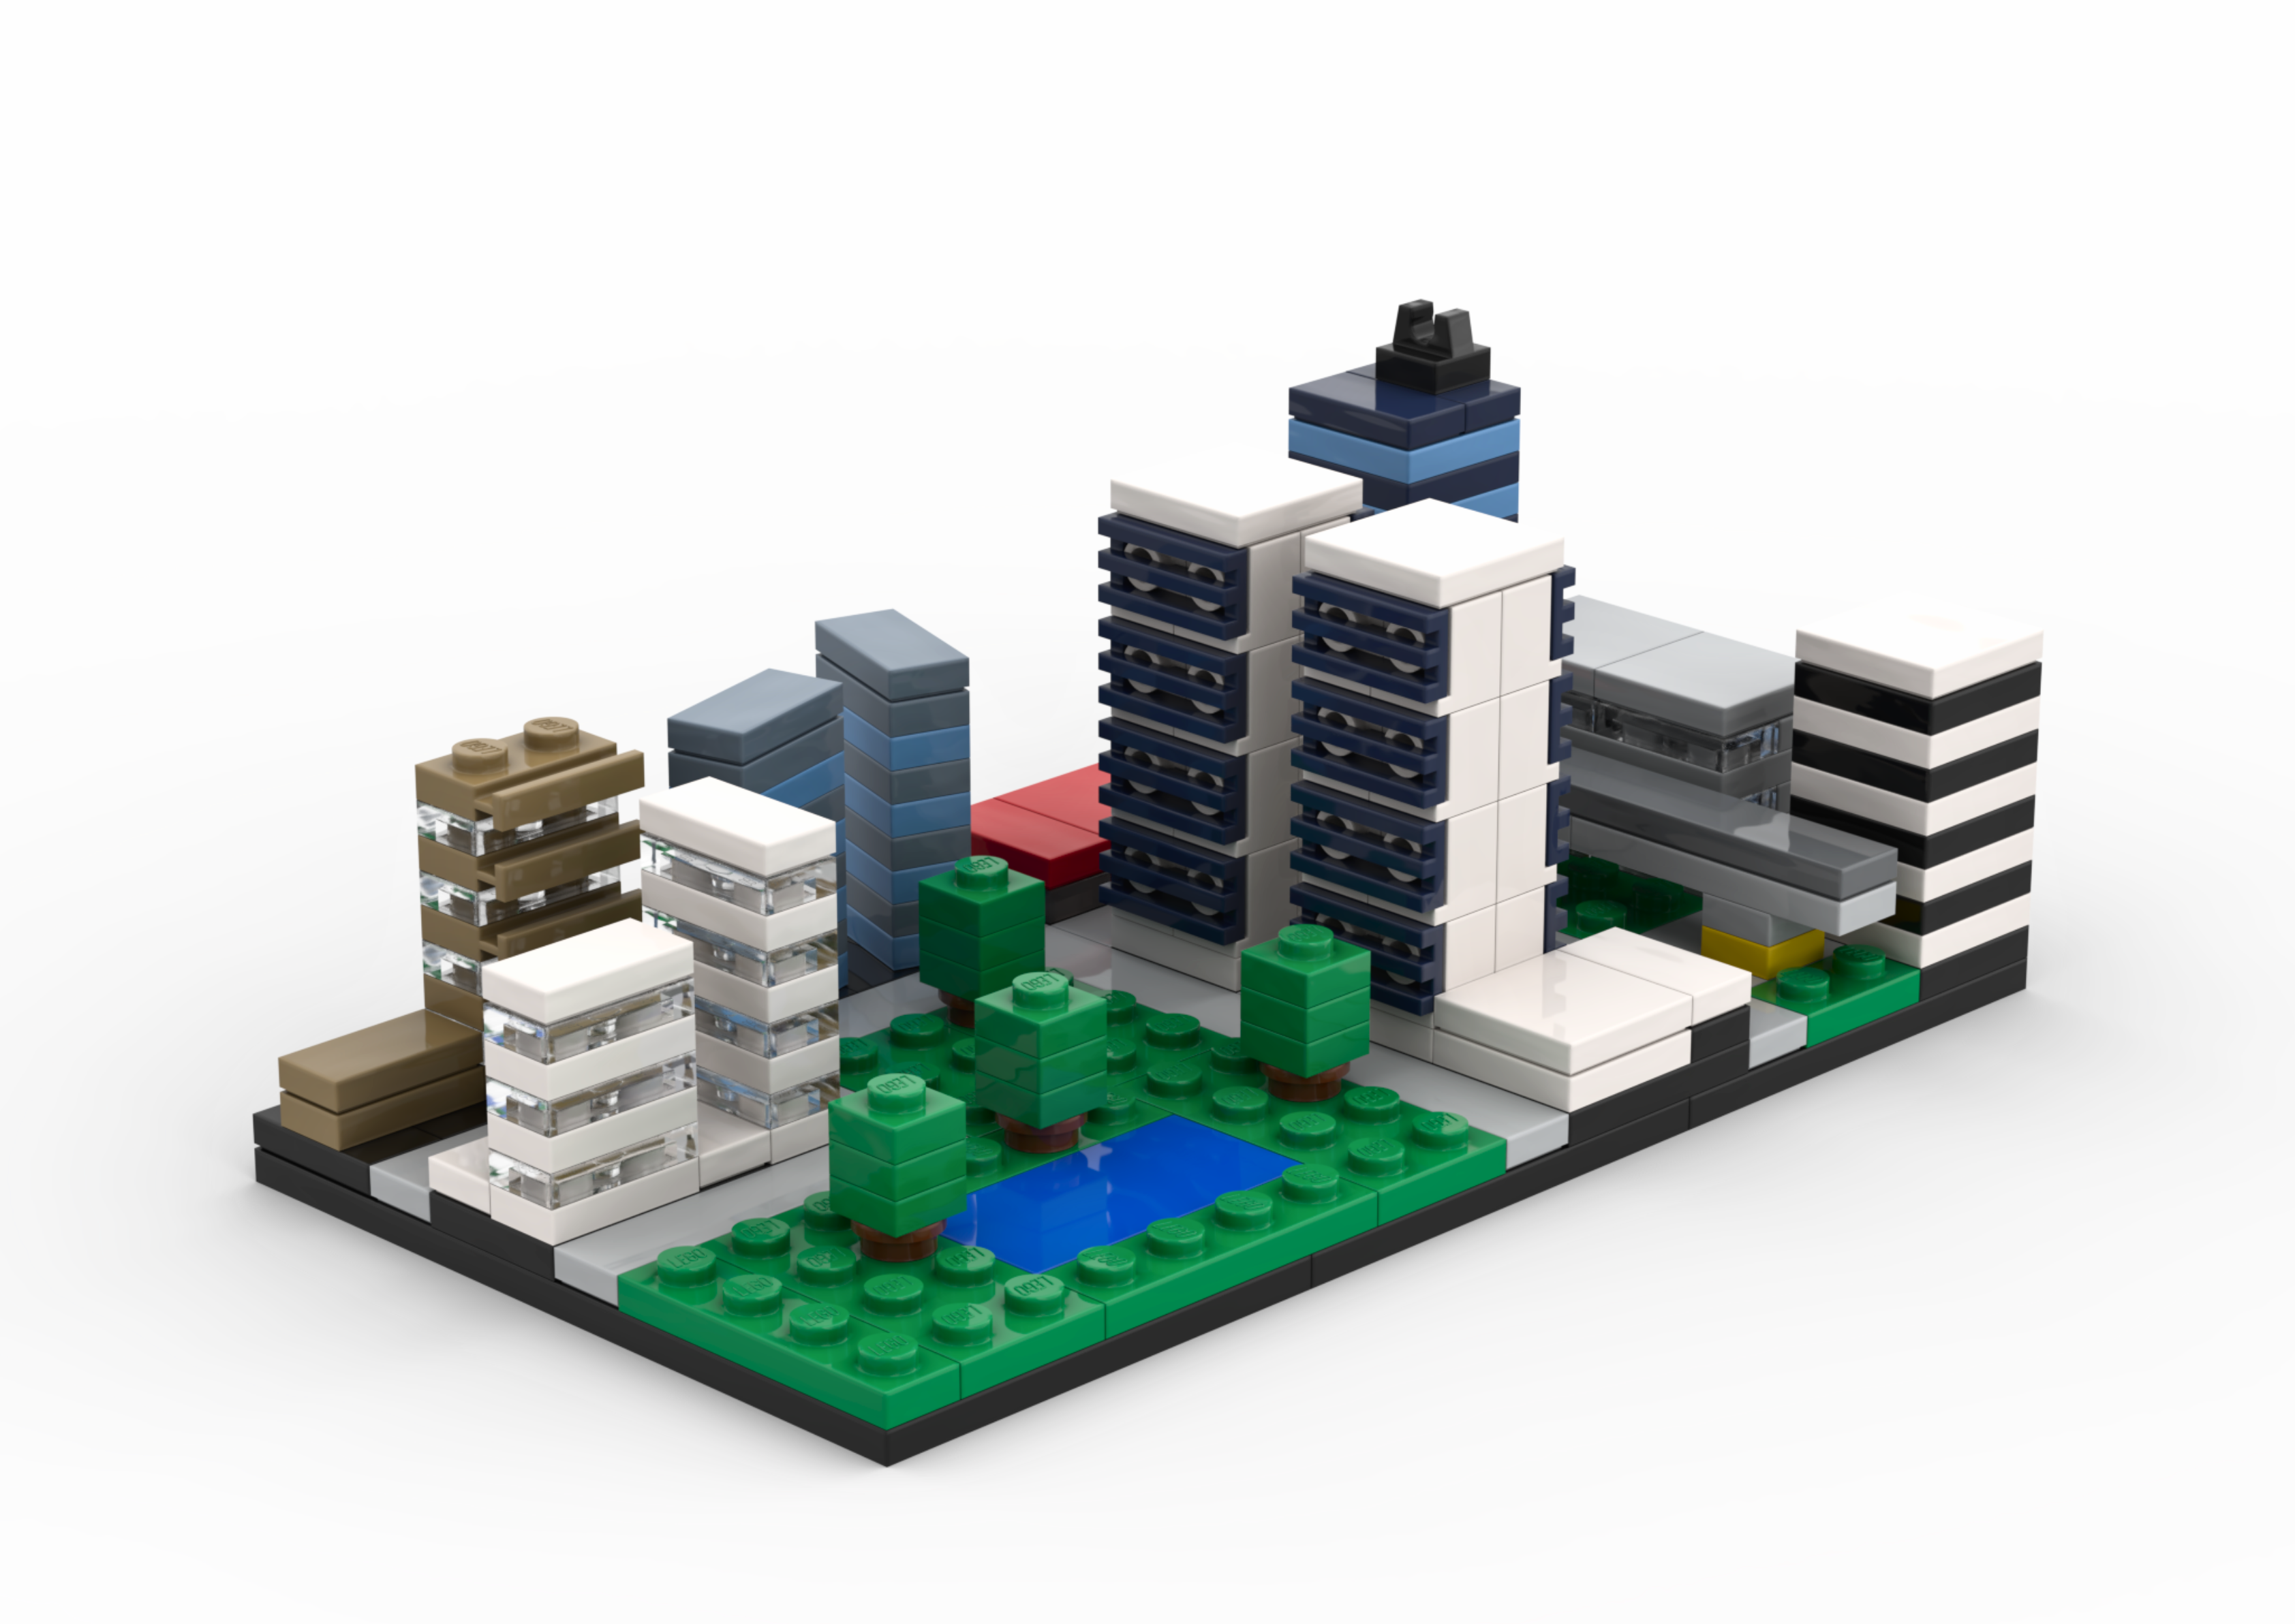 3D rendered image of the LEGO City Central Park District MOC.